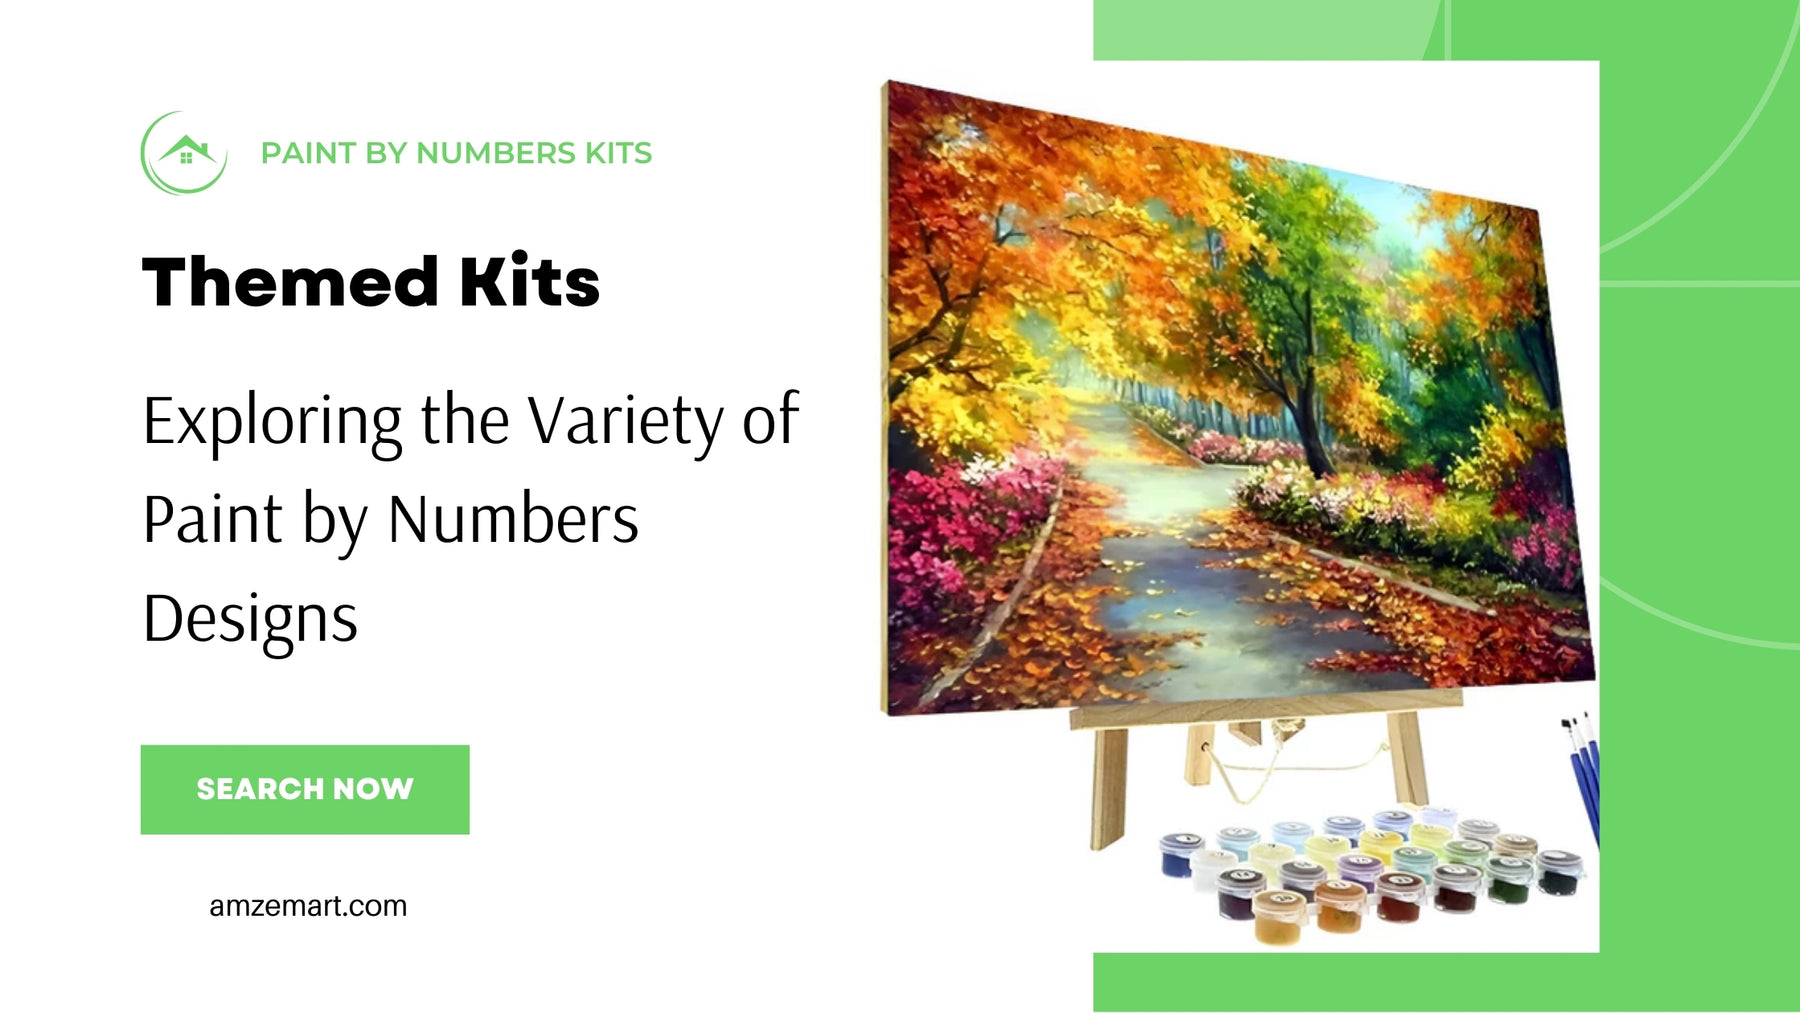 Themed Kits: Exploring the Variety of Paint by Numbers Designs